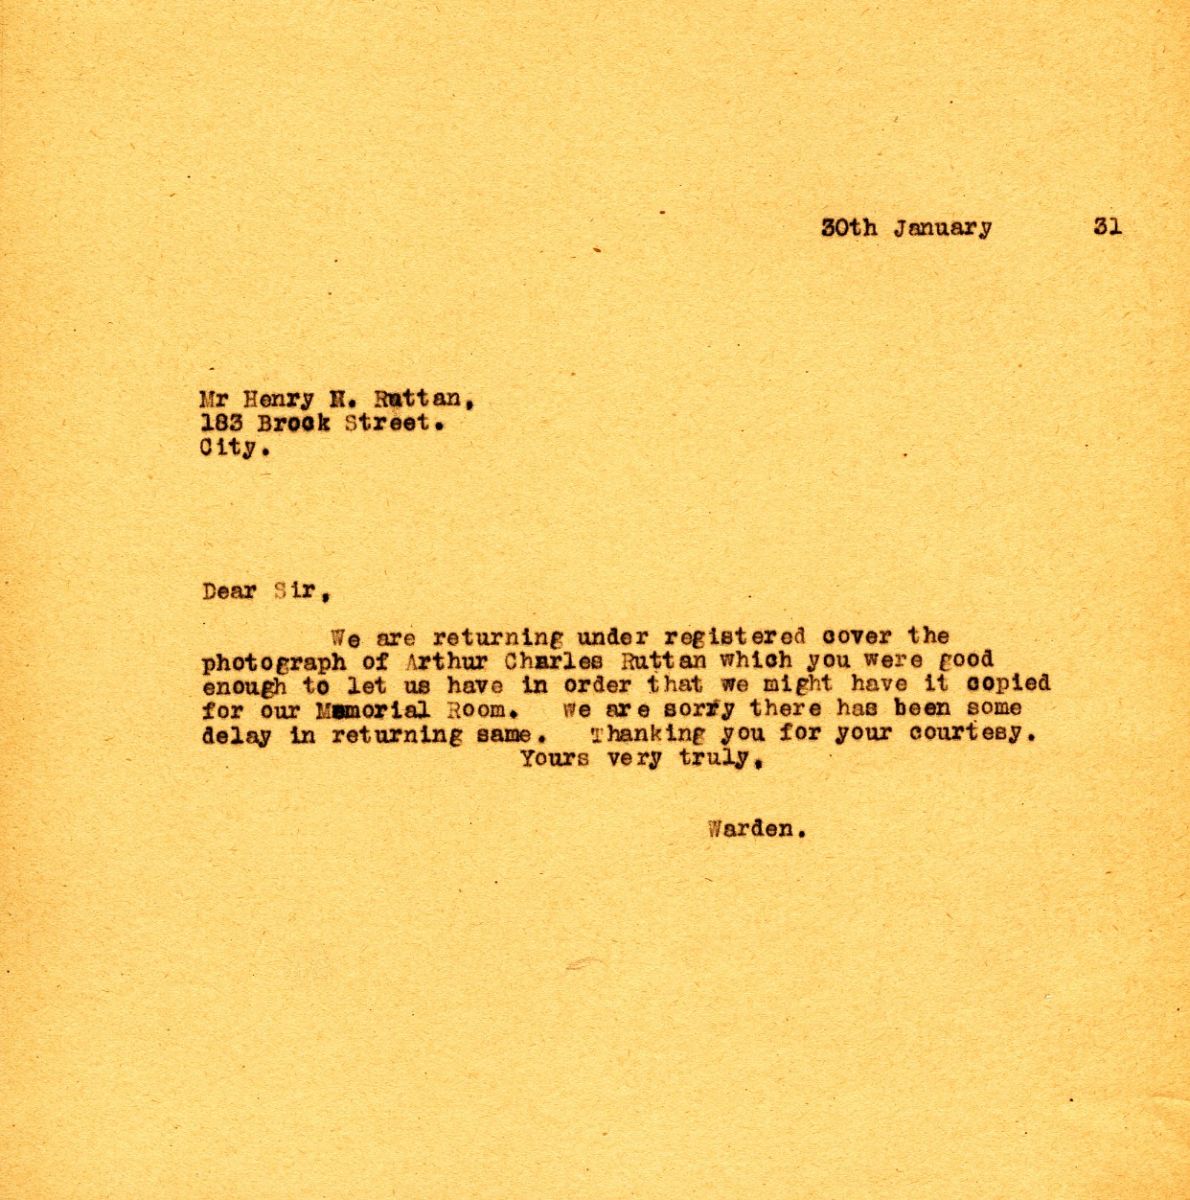 Letter from the Warden to Mr. Henry E. Ruttan, 30th January 1931